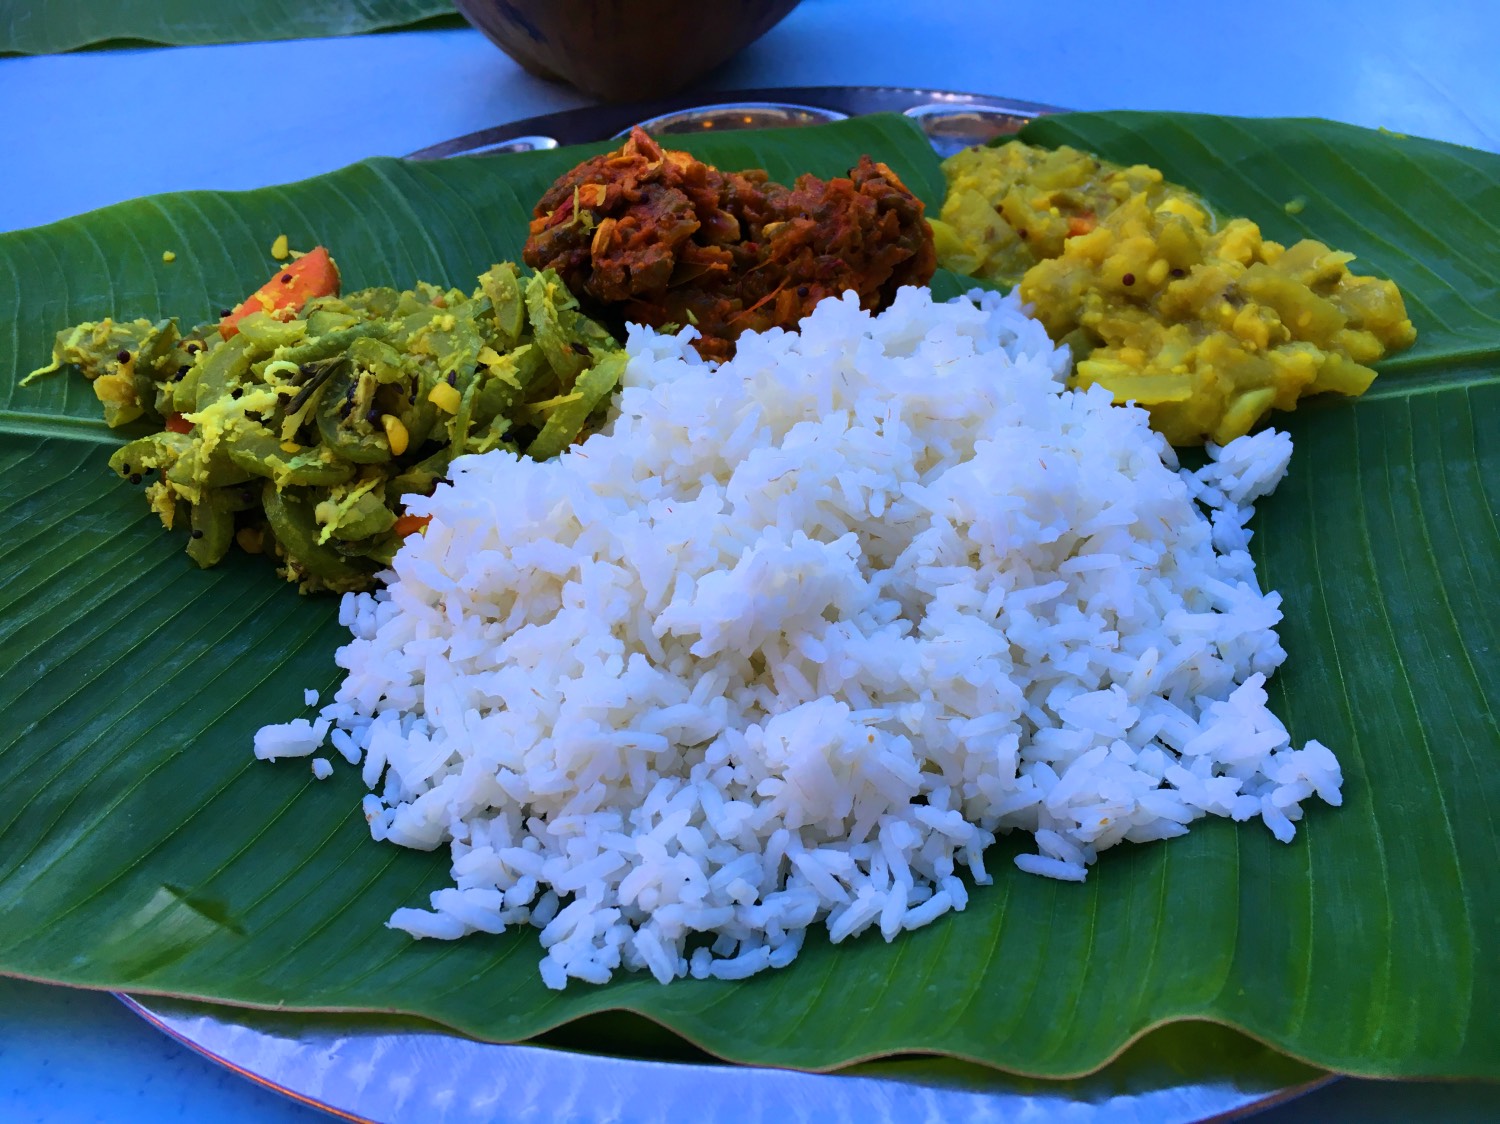 Banana leaf curry. This is one of the best things to do in Kuala Lumpur, Malaysa in 2 days. Read the article for a complete 2-day itinerary for KL. #kl #malaysia. #klitinerary #2daykualalumpur #kualalumpurguide #kualalumpurtraveling #kualalumpuritinerary #klitinerary